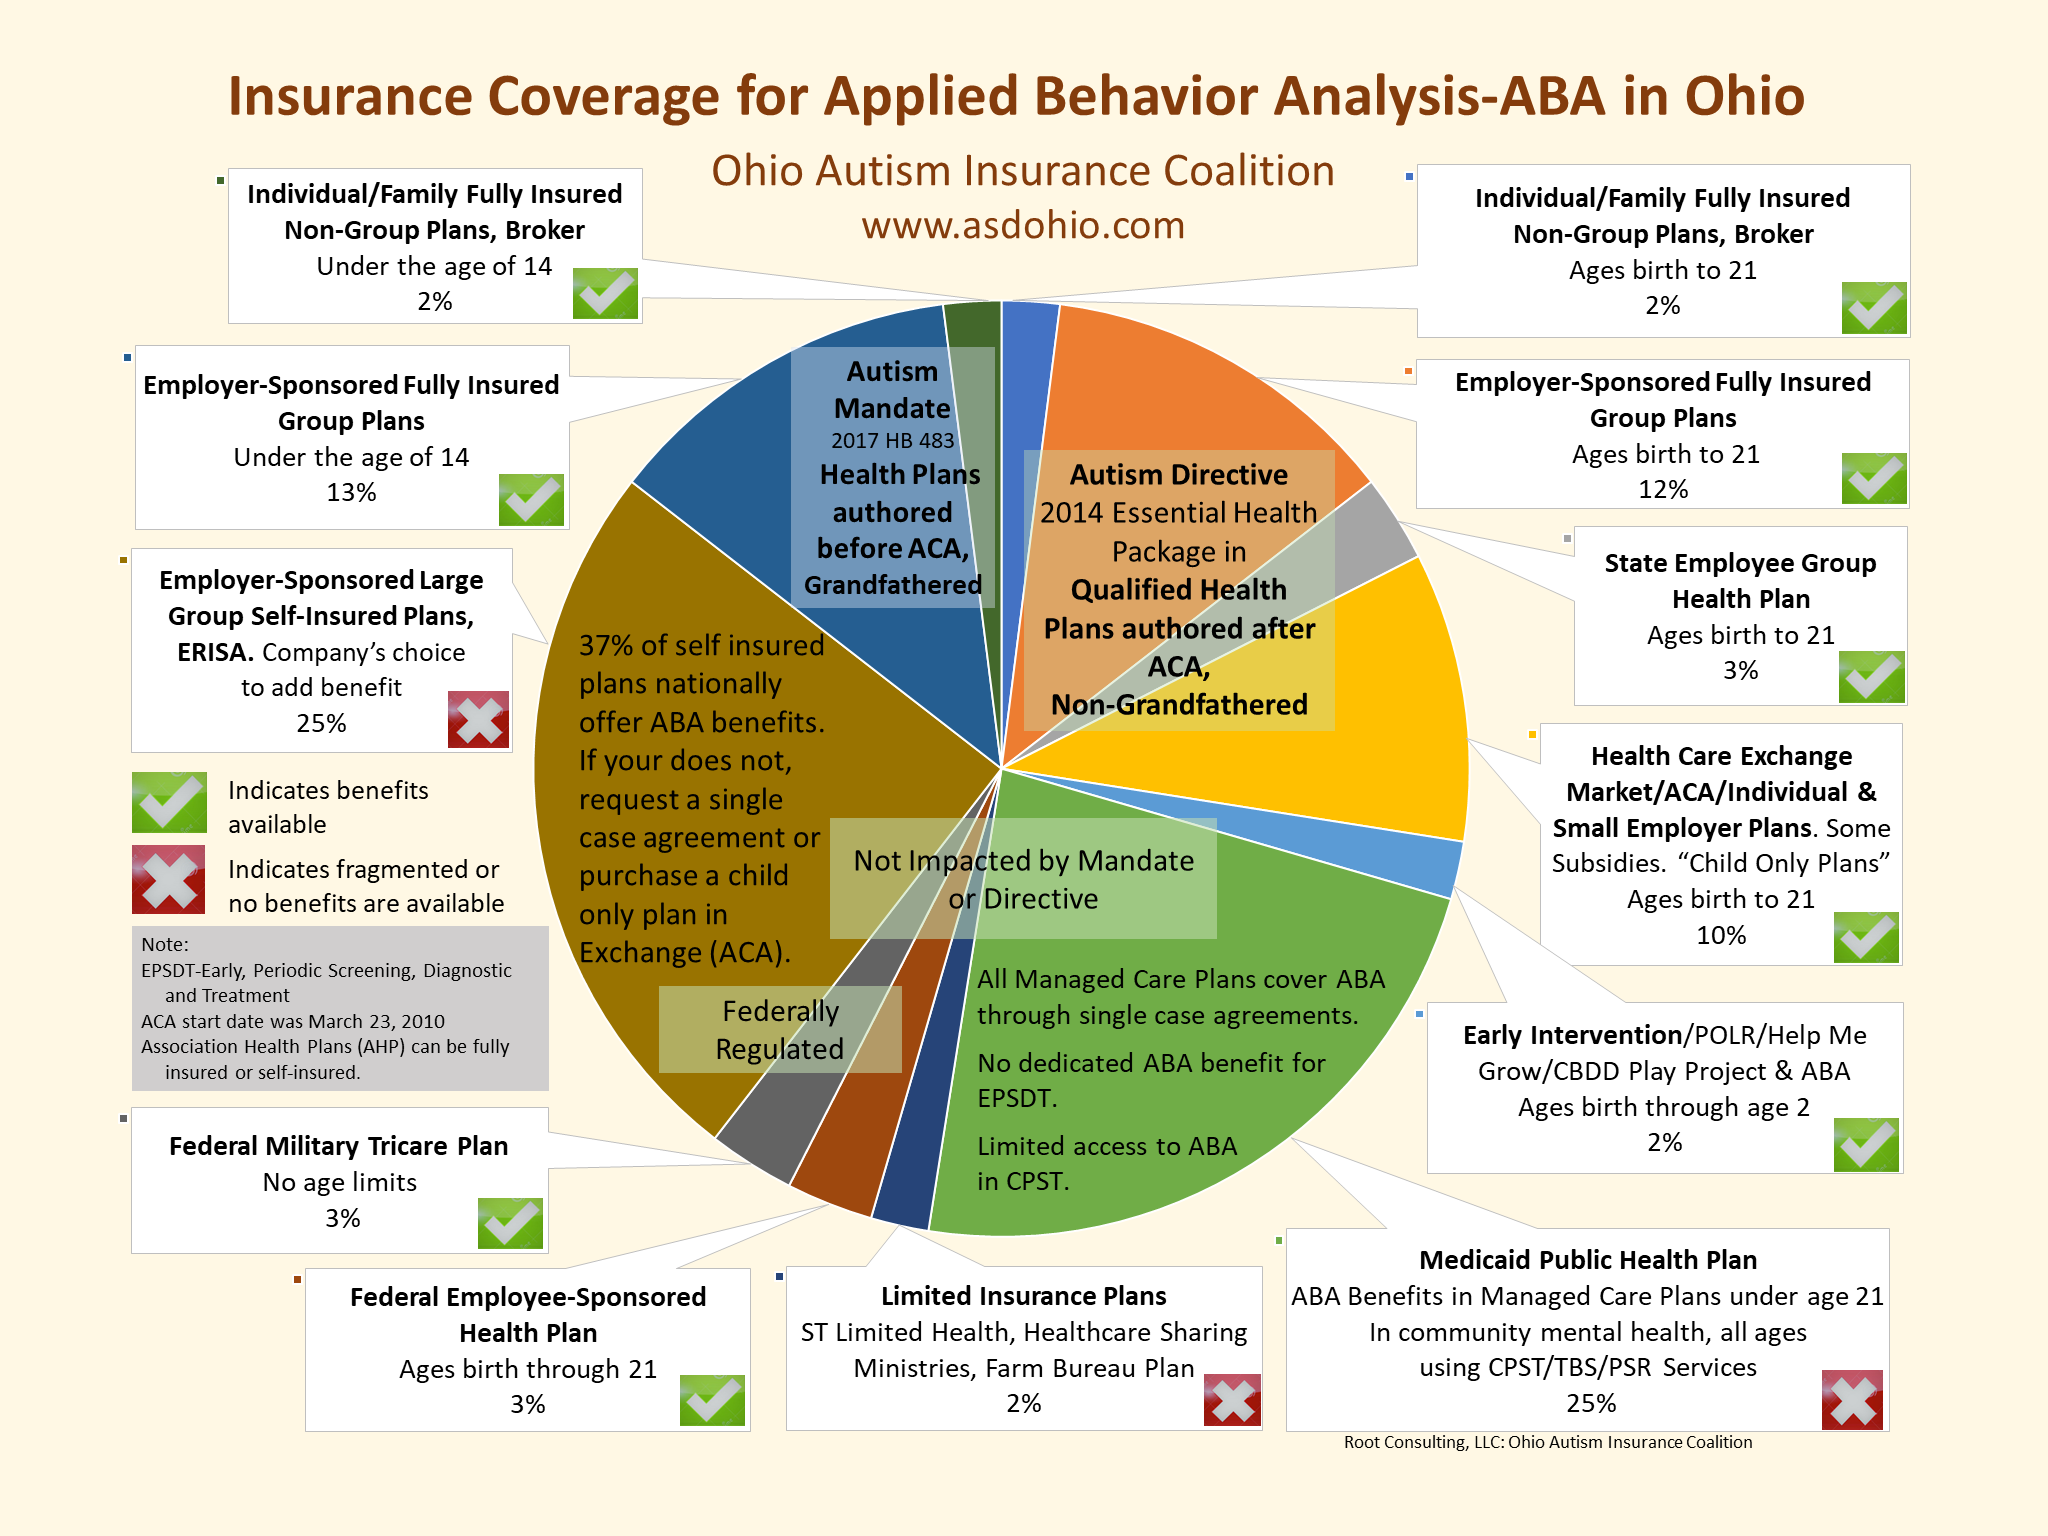 visual-pie-chart-of-insurance-coverage-in-ohio-for-behavior-analytic-aba-treatments-march-2019